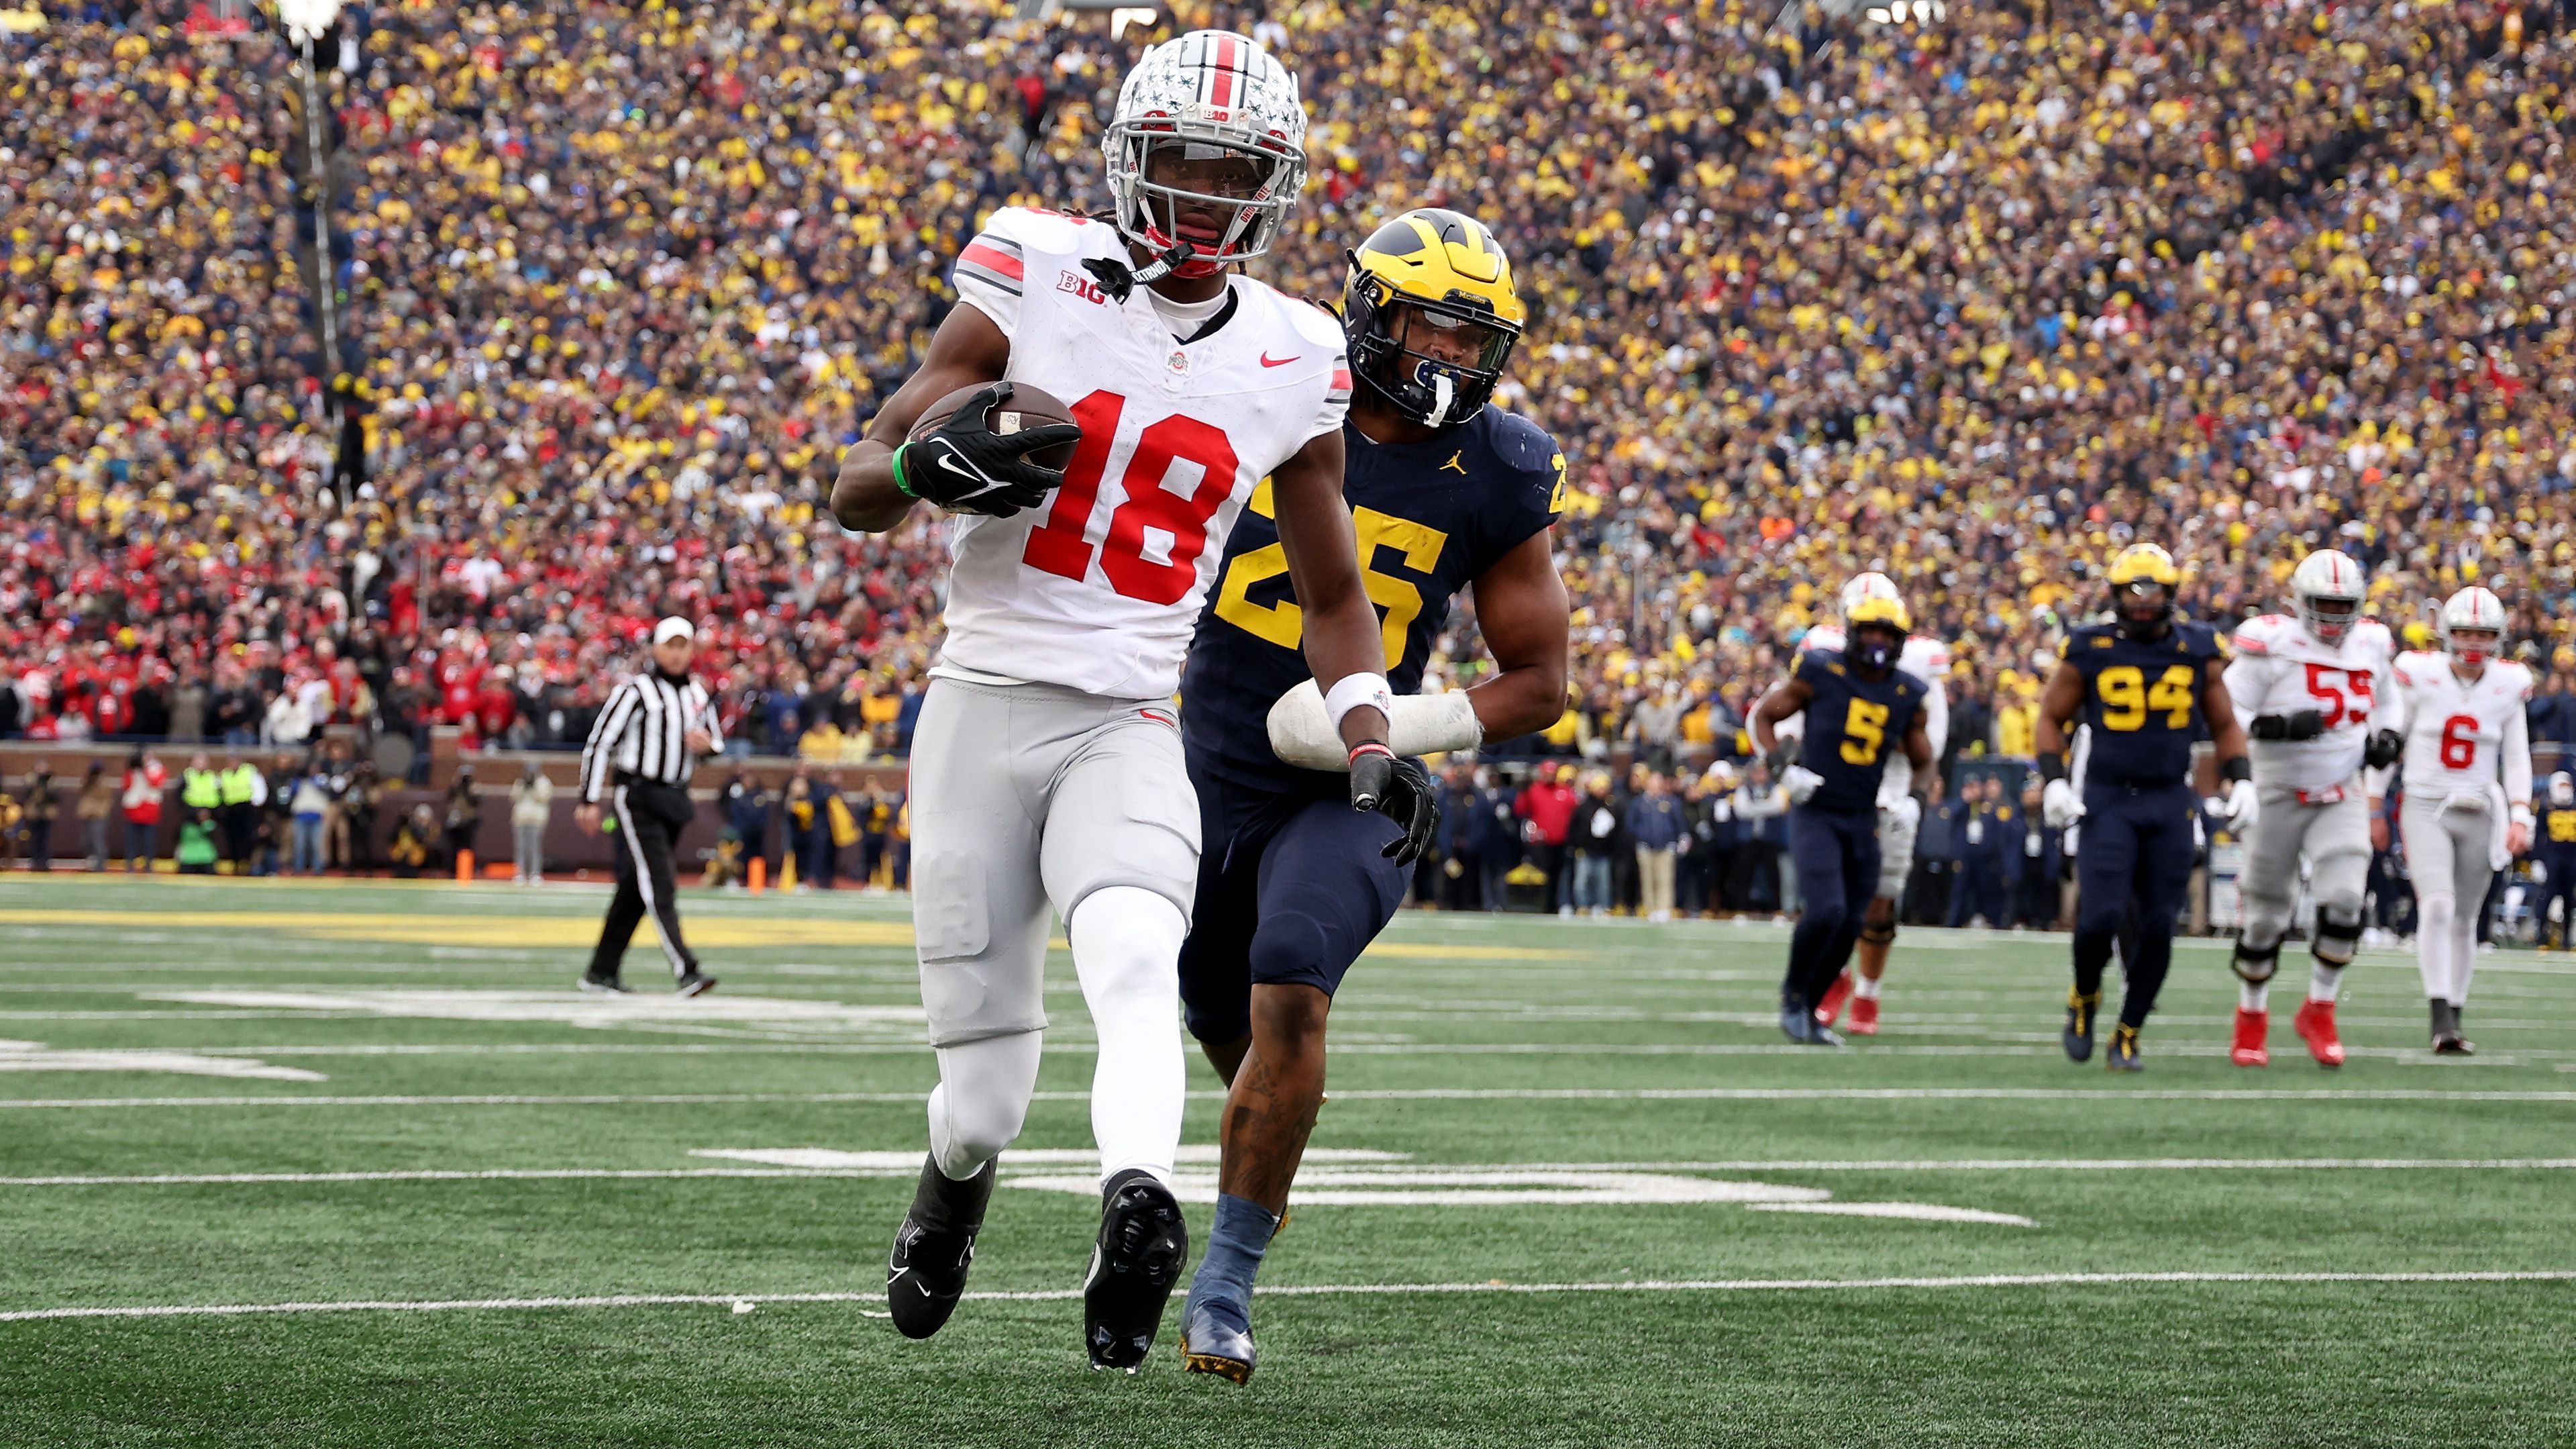 <strong>Marvin Harrison Jr.</strong><br>Position: Wide Receiver<br>College: Ohio State<br>Prognose: Top-5-Pick